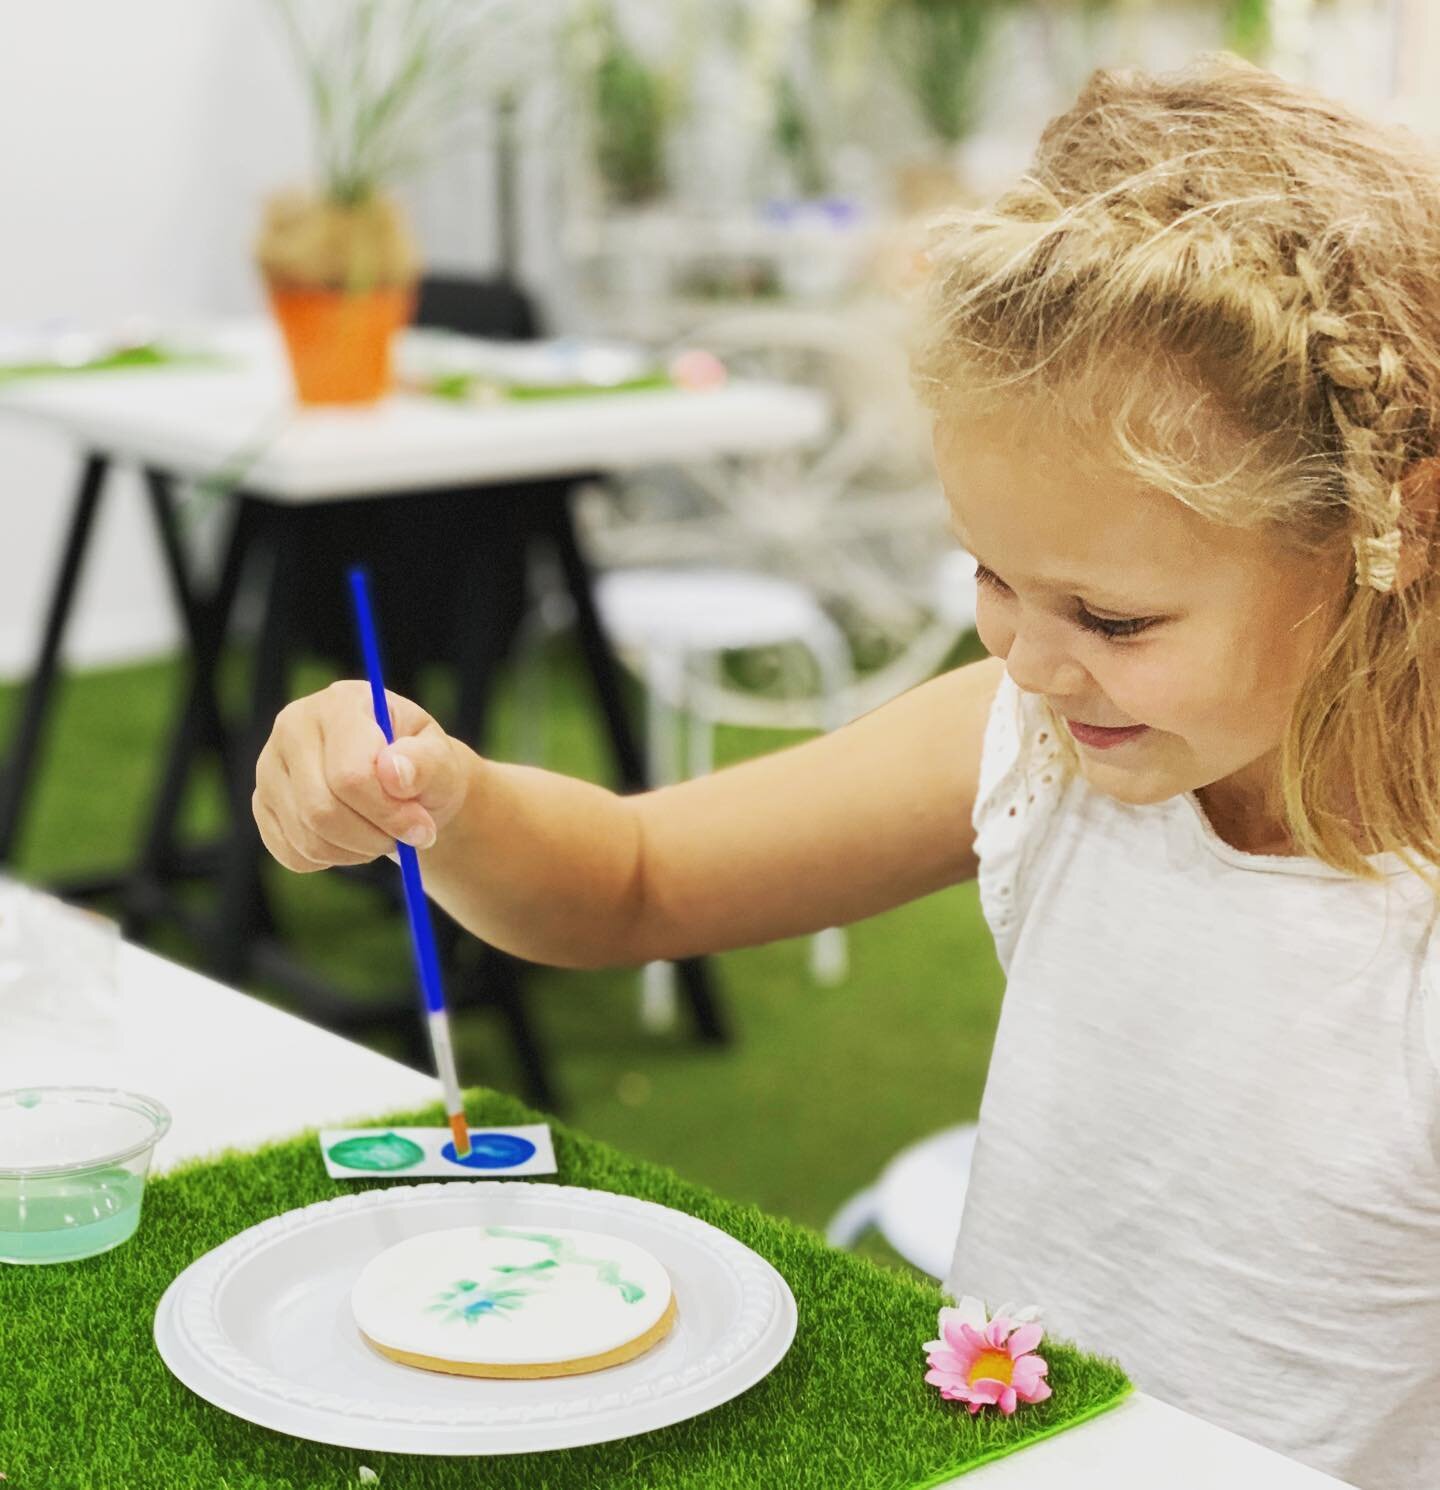 Fancy a delicious cookie &amp; a craft activity that keeps children excited &amp; engaged?! Cookie decorating is just that...FUN! 😋🍪🧑🏻&zwj;🎨